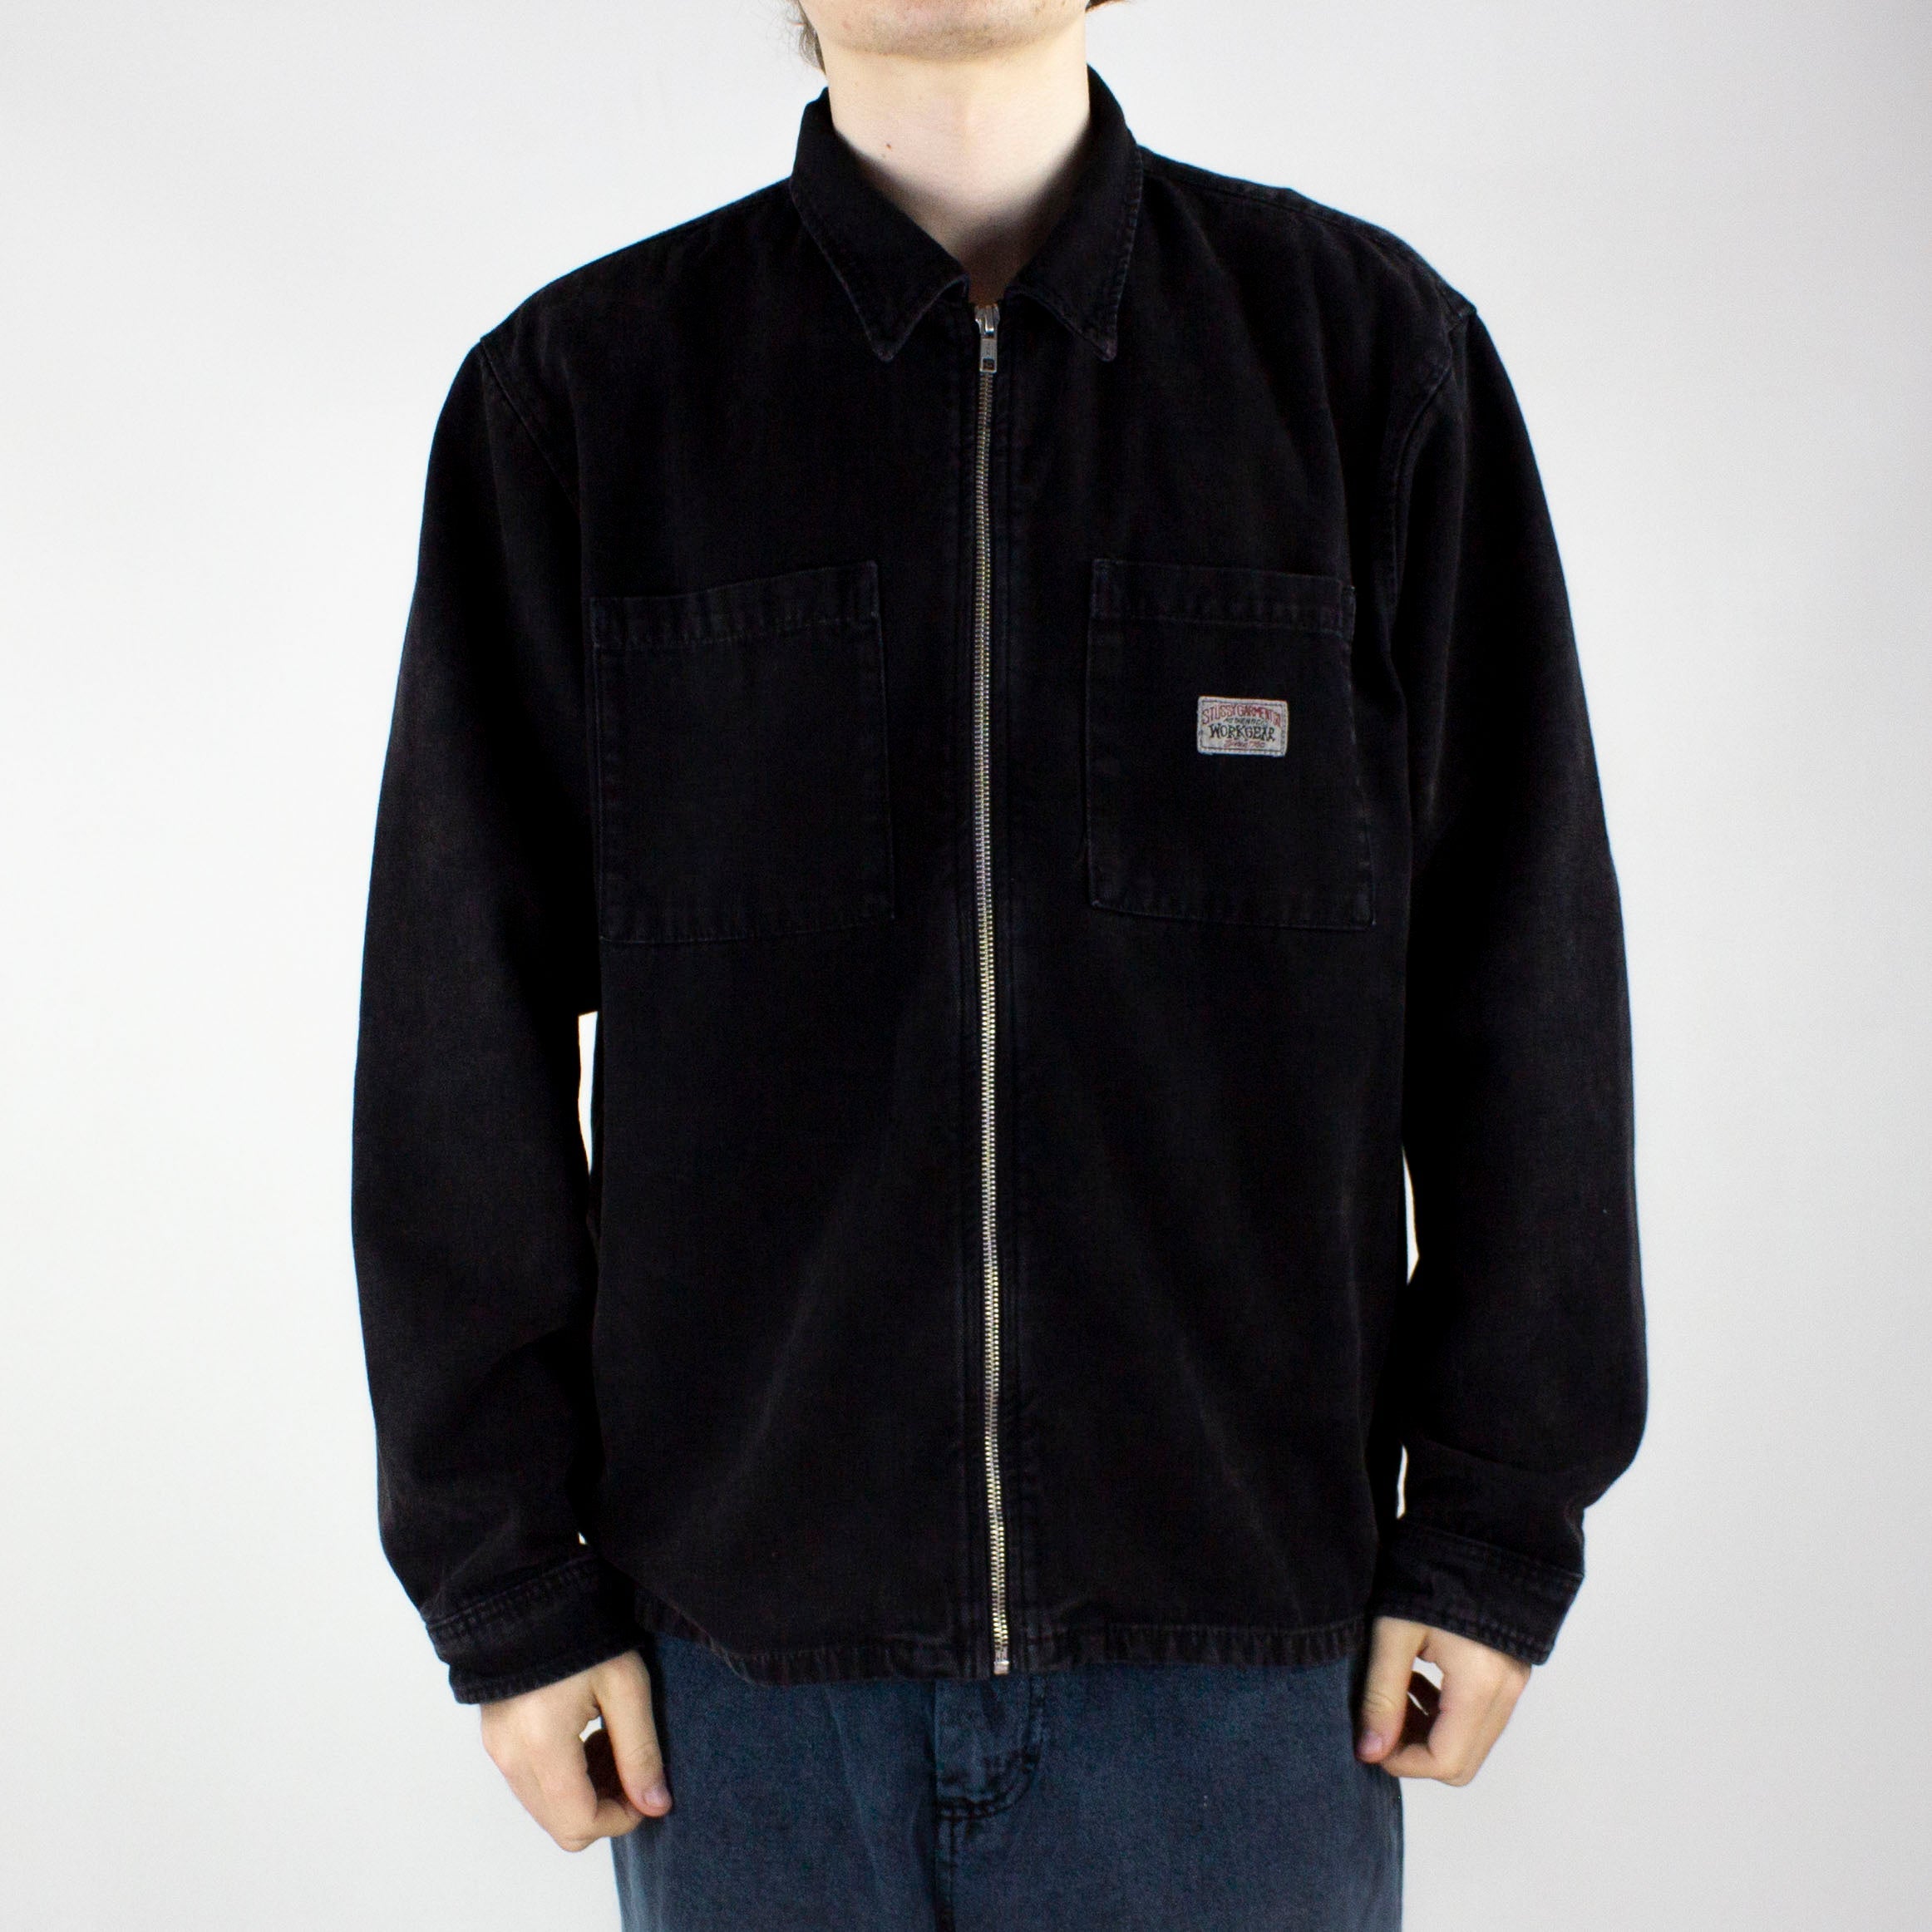 Stussy Washed Canvas Zip Up Shirt – Black exclusive at Remix